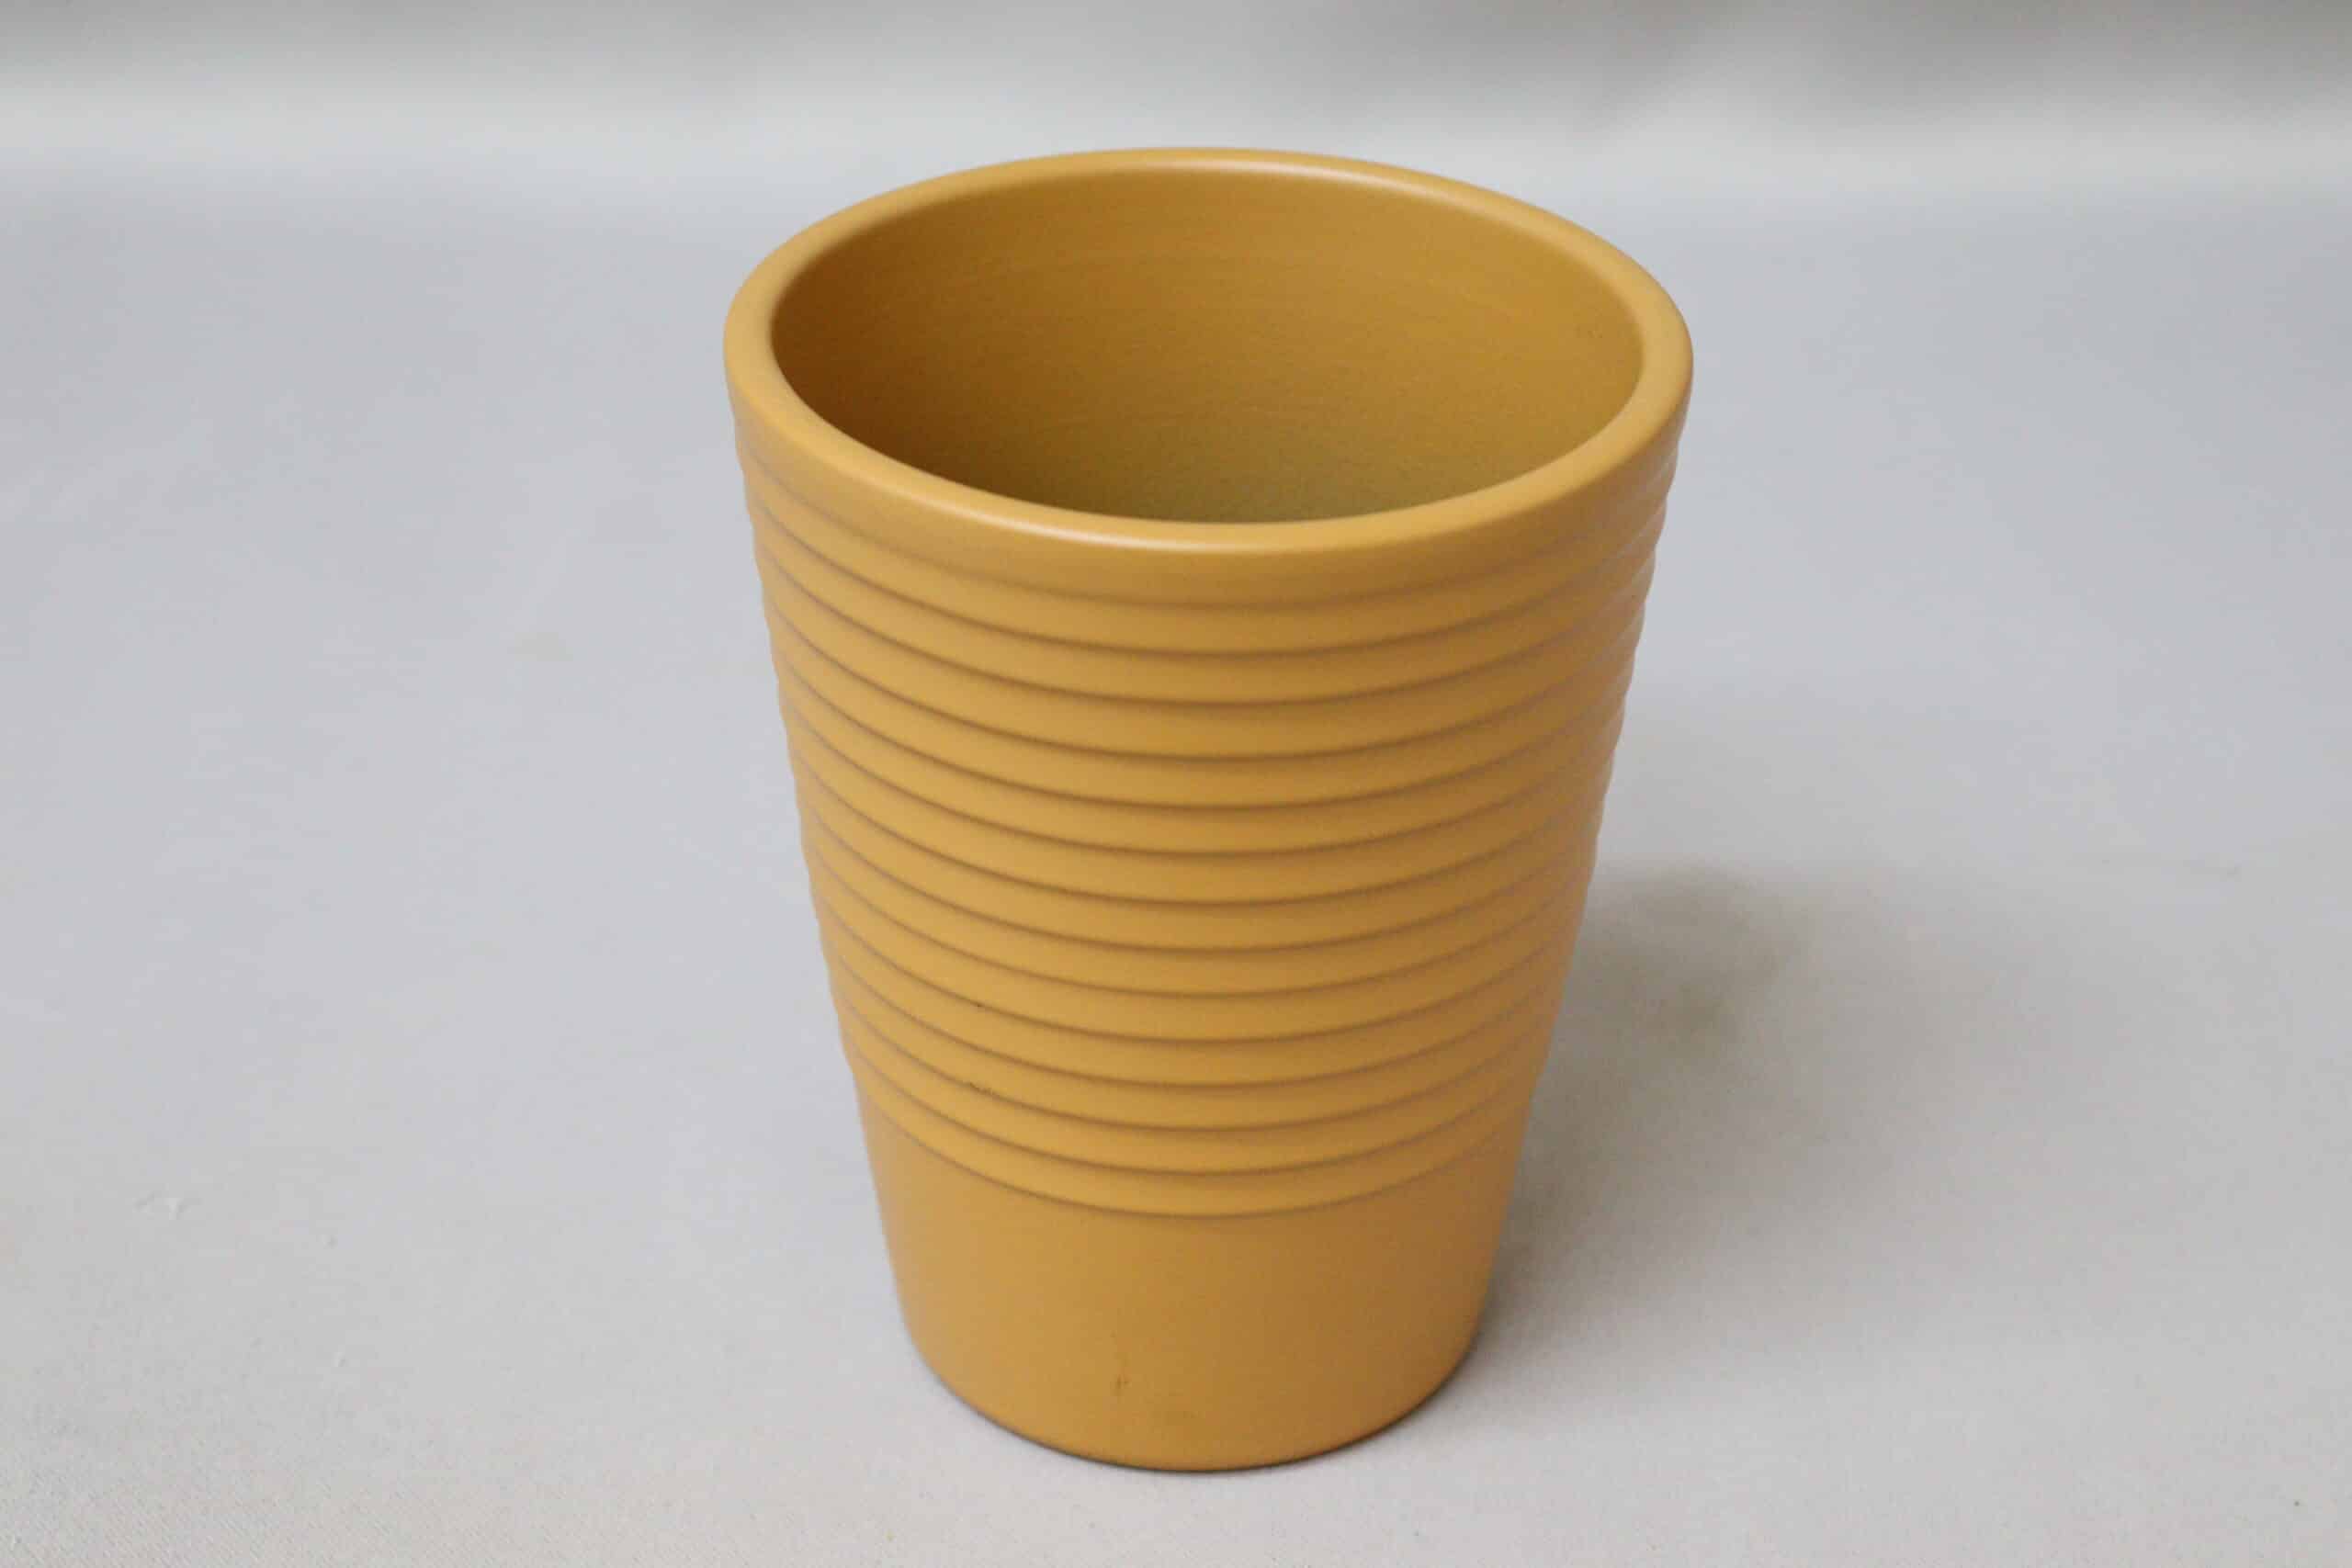 Tall, ribbed caramel-coloured pot cover for potted plants.